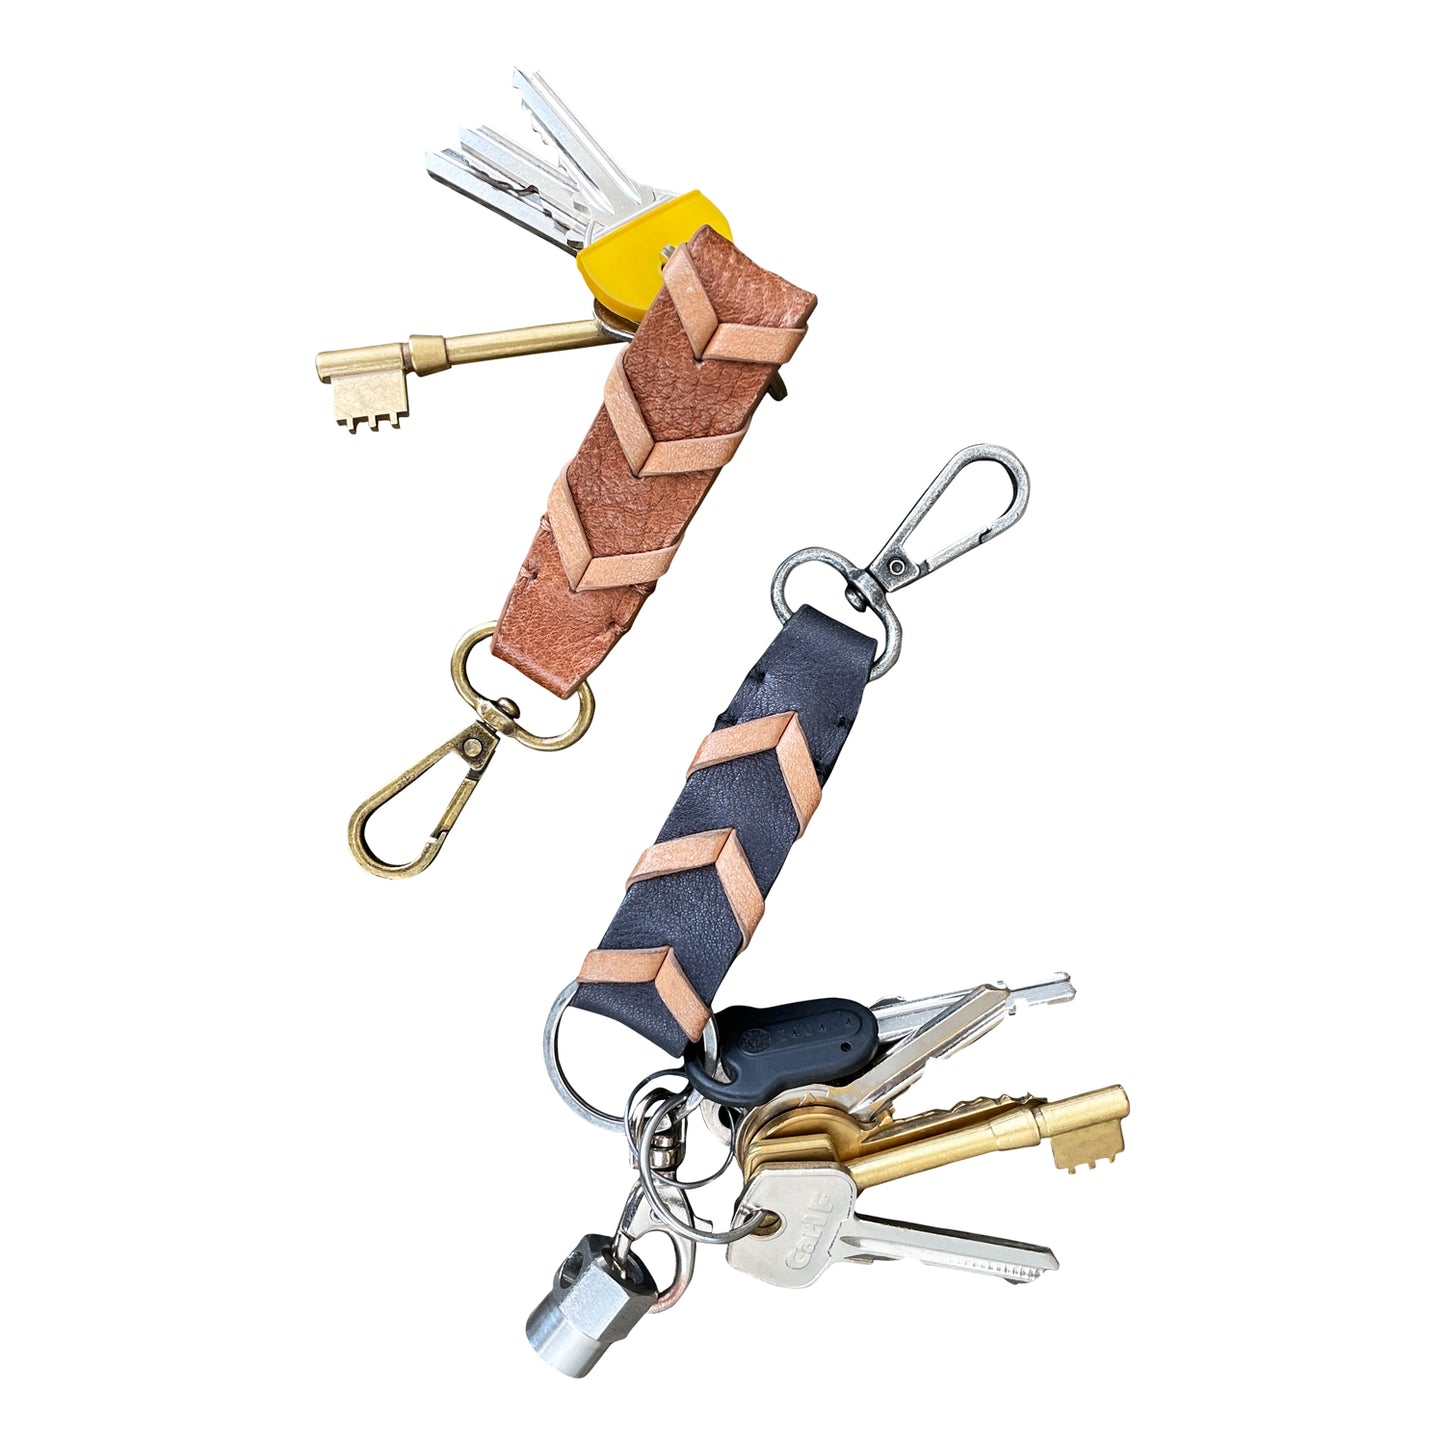 Beau Leather Key Ring in Stone